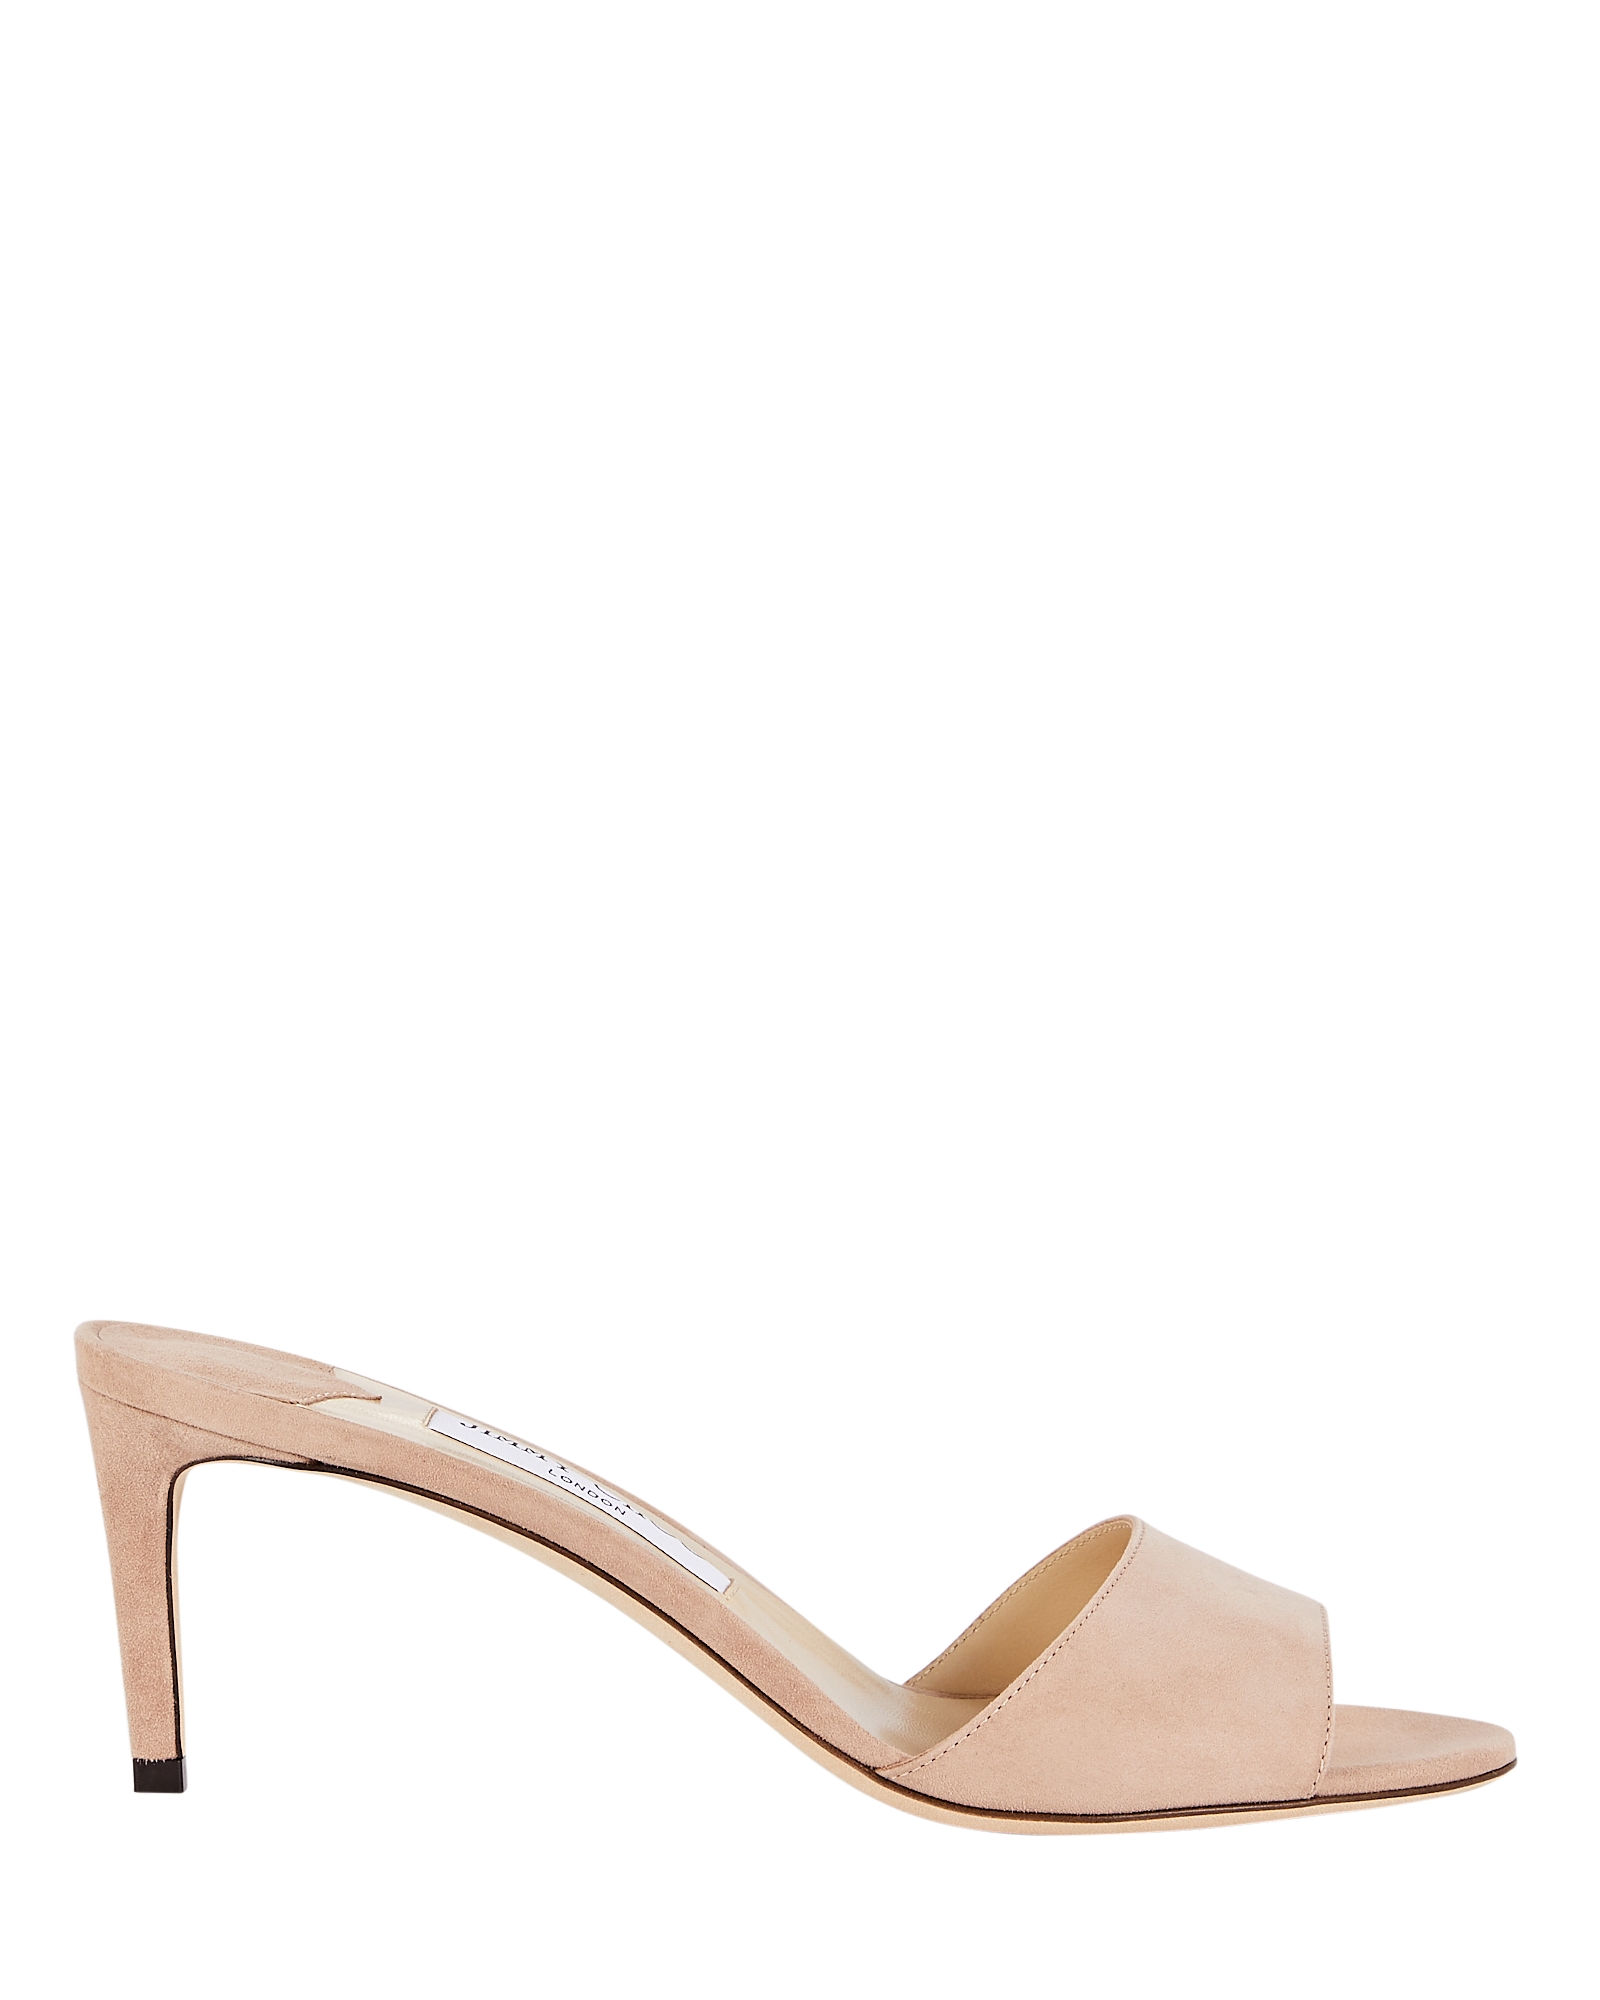 Jimmy Choo Stacey 65 Suede Sandals | INTERMIX®